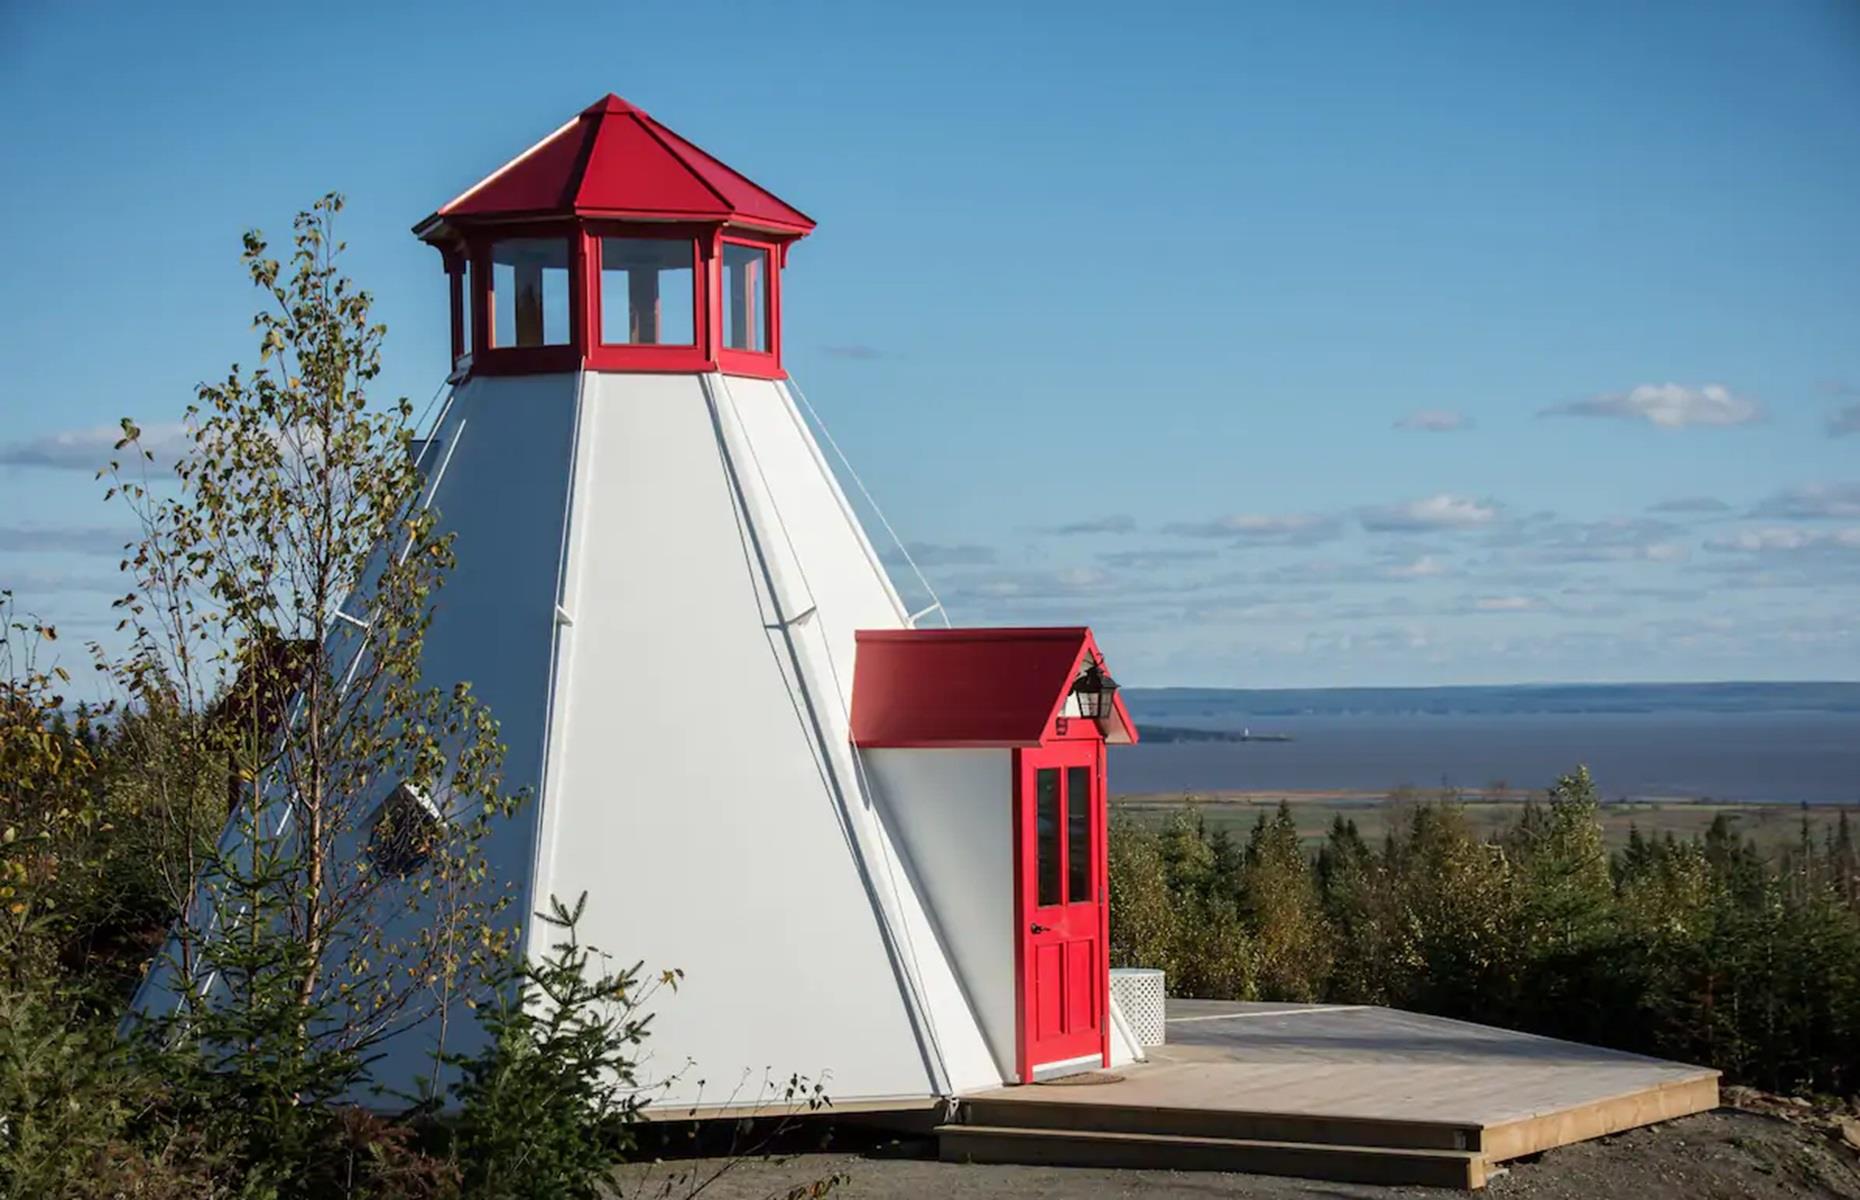 <p>There are plenty of quirky and surprising properties in Canada and this is just one of them. Located close to Fundy National Park in Hopewell Hill, New Brunswick, this <a href="https://www.airbnb.ca/rooms/34564640?adults=1&category_tag=Tag%3A8225&children=0&enable_m3_private_room=true&infants=0&pets=0&photo_id=750354849&search_mode=flex_destinations_search&check_in=2024-02-01&check_out=2024-02-06&source_impression_id=p3_1706100388_oZ1ytxSA5S1SMLpv&previous_page_section_name=1000&federated_search_id=96c12aa7-b991-4424-b9aa-06dddb08ca3a">lighthouse-themed tiny home</a> is weird and wonderful in equal measure.</p>  <p>Secluded on top of a hillside, with sweeping valley views, the pad would provide an unforgettable stay.</p>